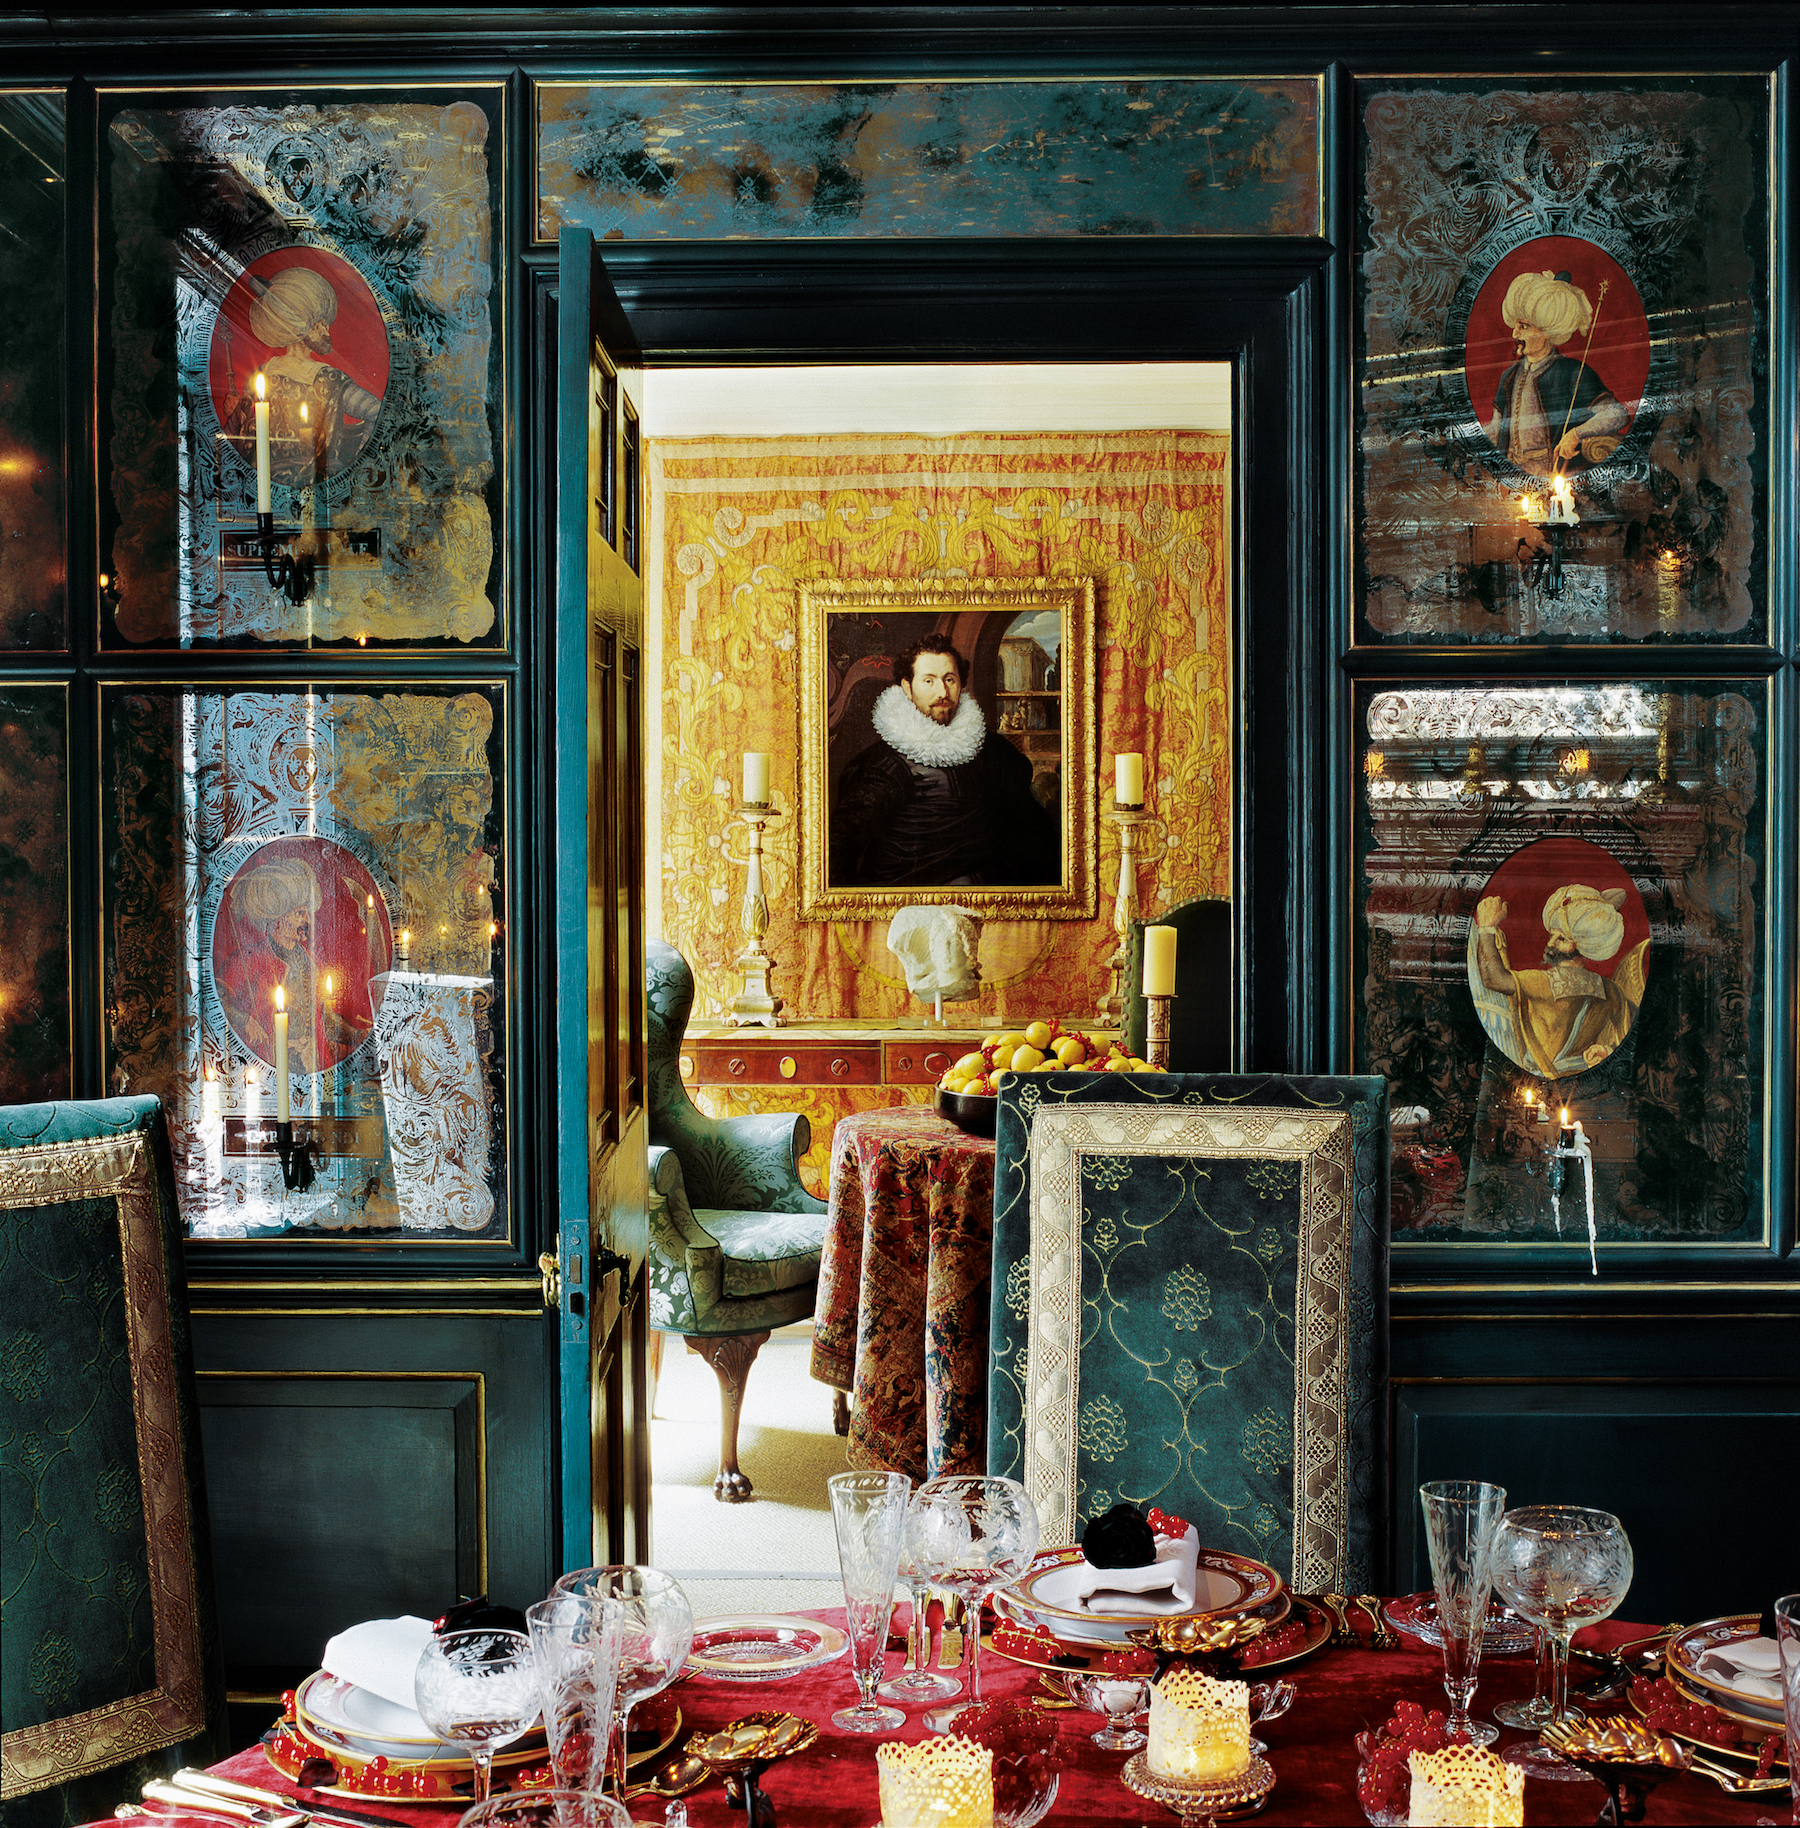 An Ottoman-style dinning room created by interior designer Alidad with reproduction verre églomisé panels and antiqued painted wood walls in Effect Magazine